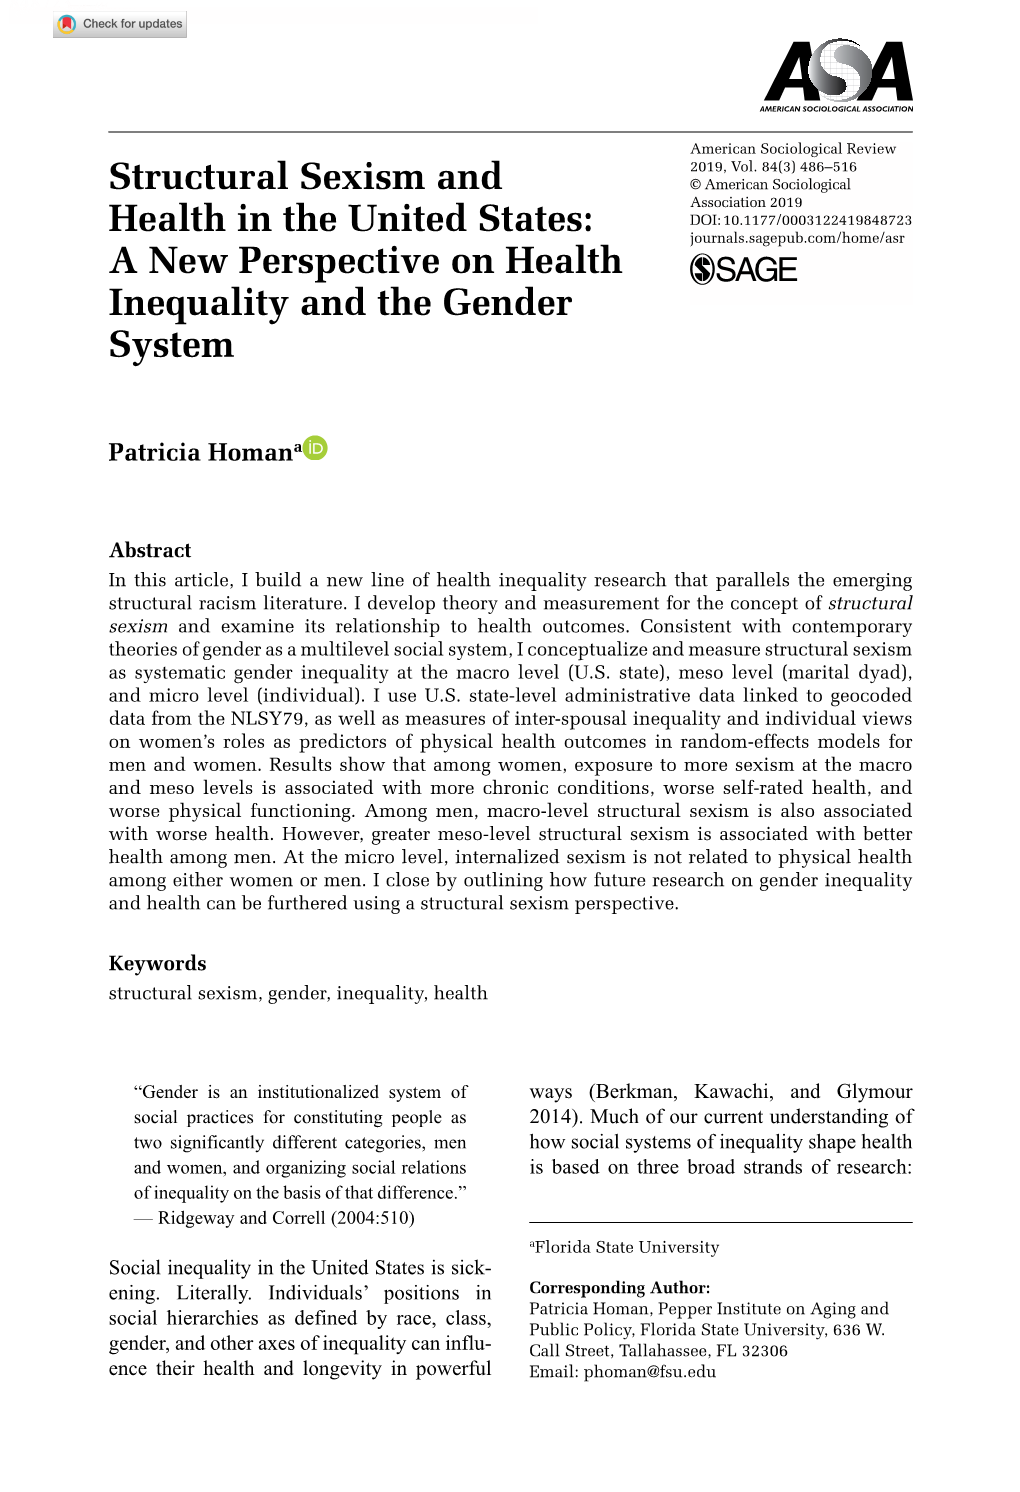 Structural Sexism and Health in the United States